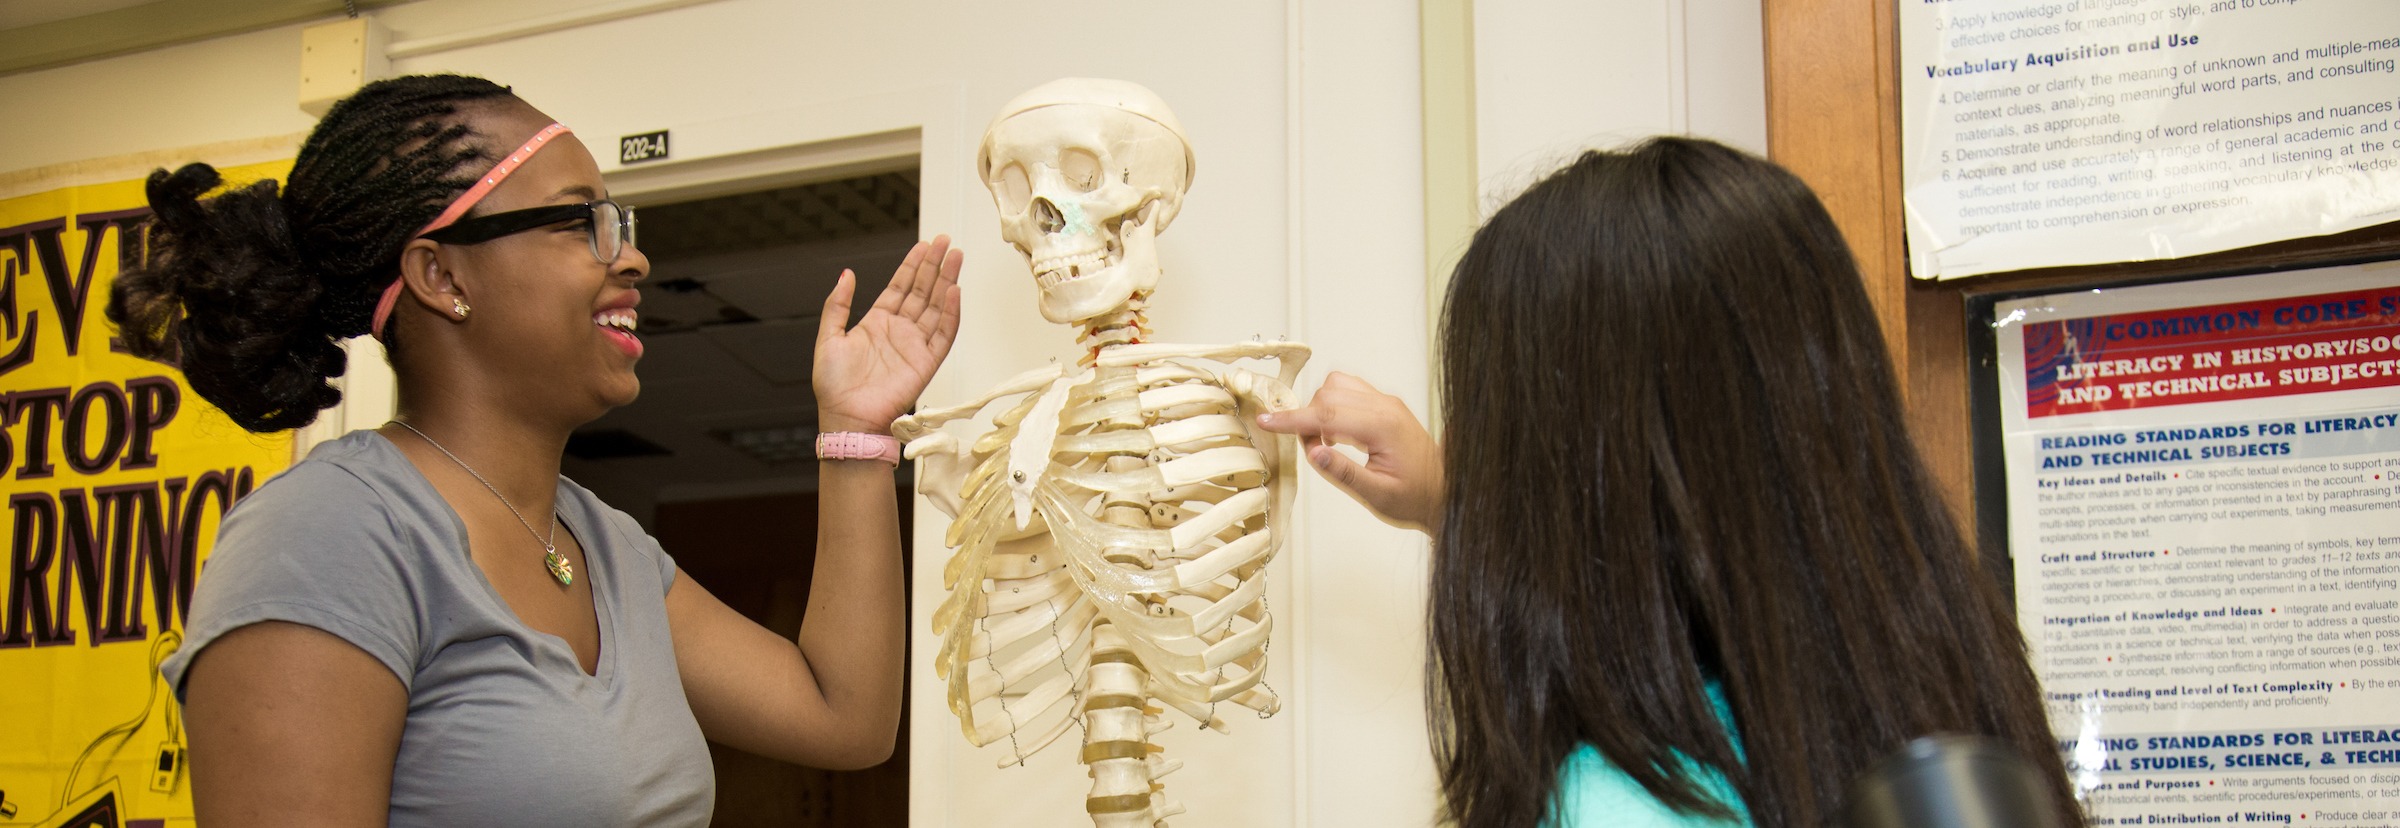 Two girls looking at skeleton at science class